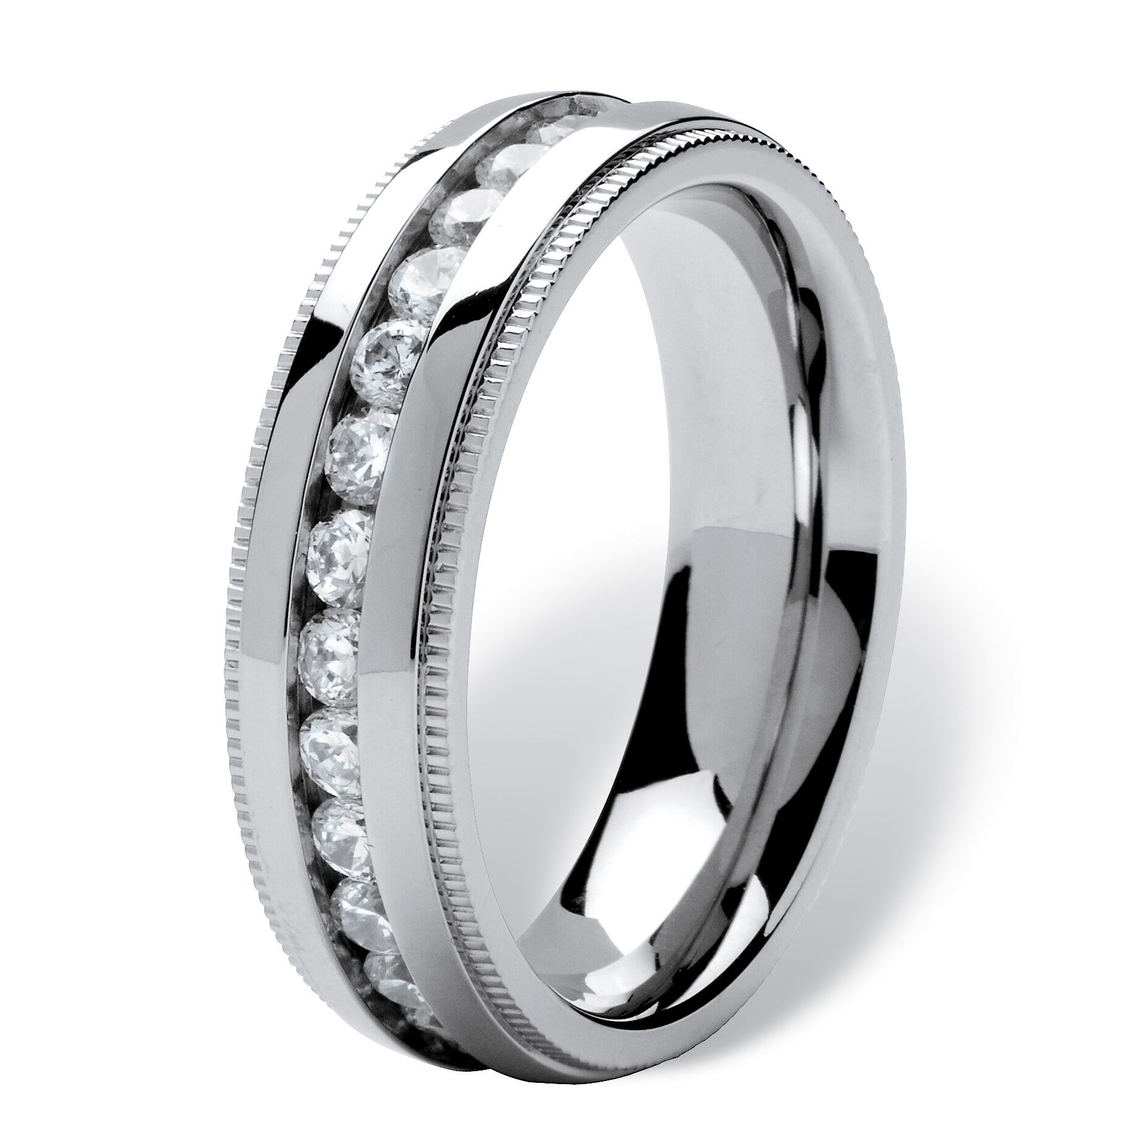 Men's 1.12 TCW Round Cubic Zirconia Eternity Band in Stainless Steel Sizes 8-16 - Image 2 of 5